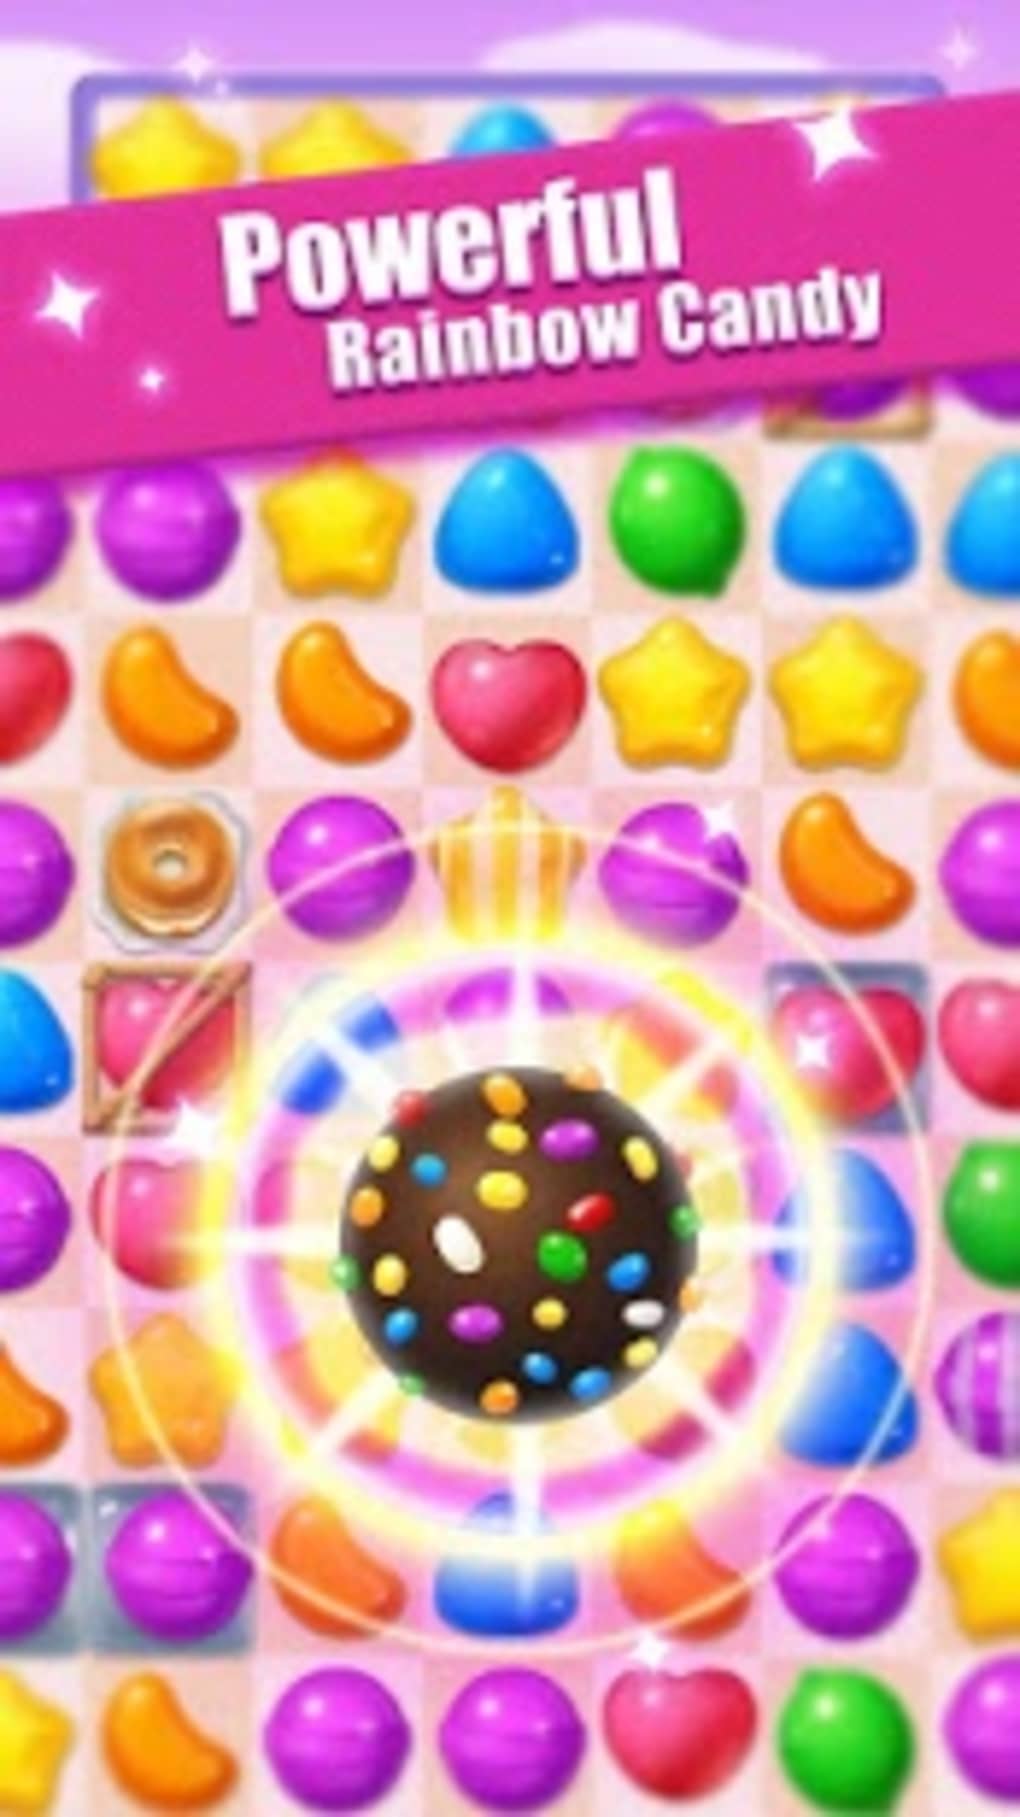 Candy Fever APK Download for Android Free